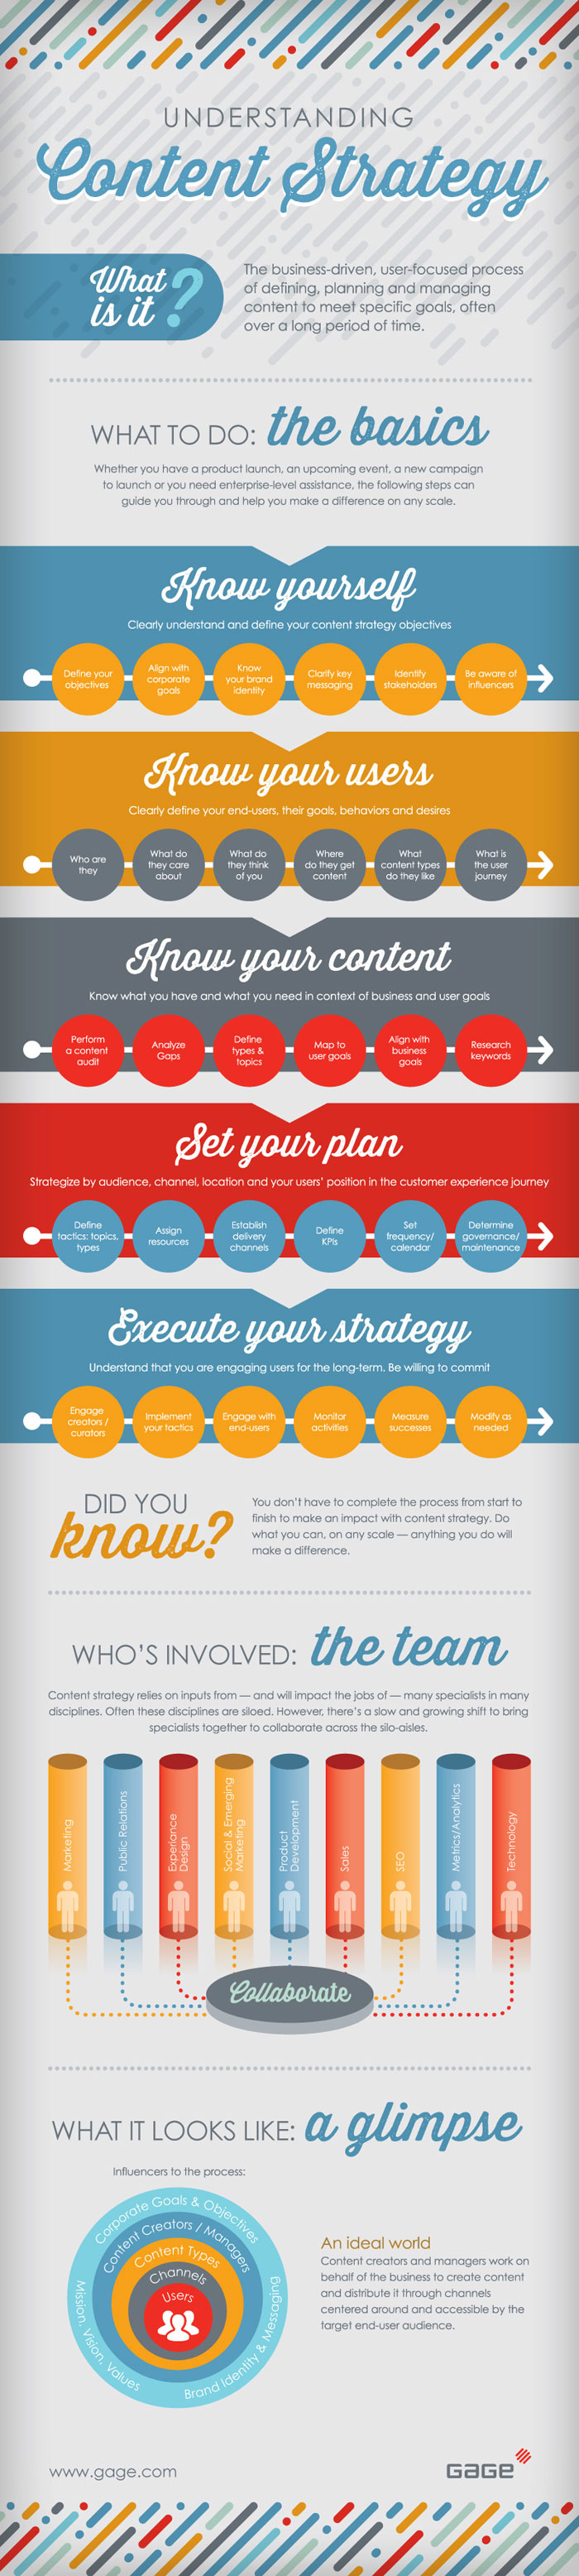 how to create a effective content marketing strategy - infographic